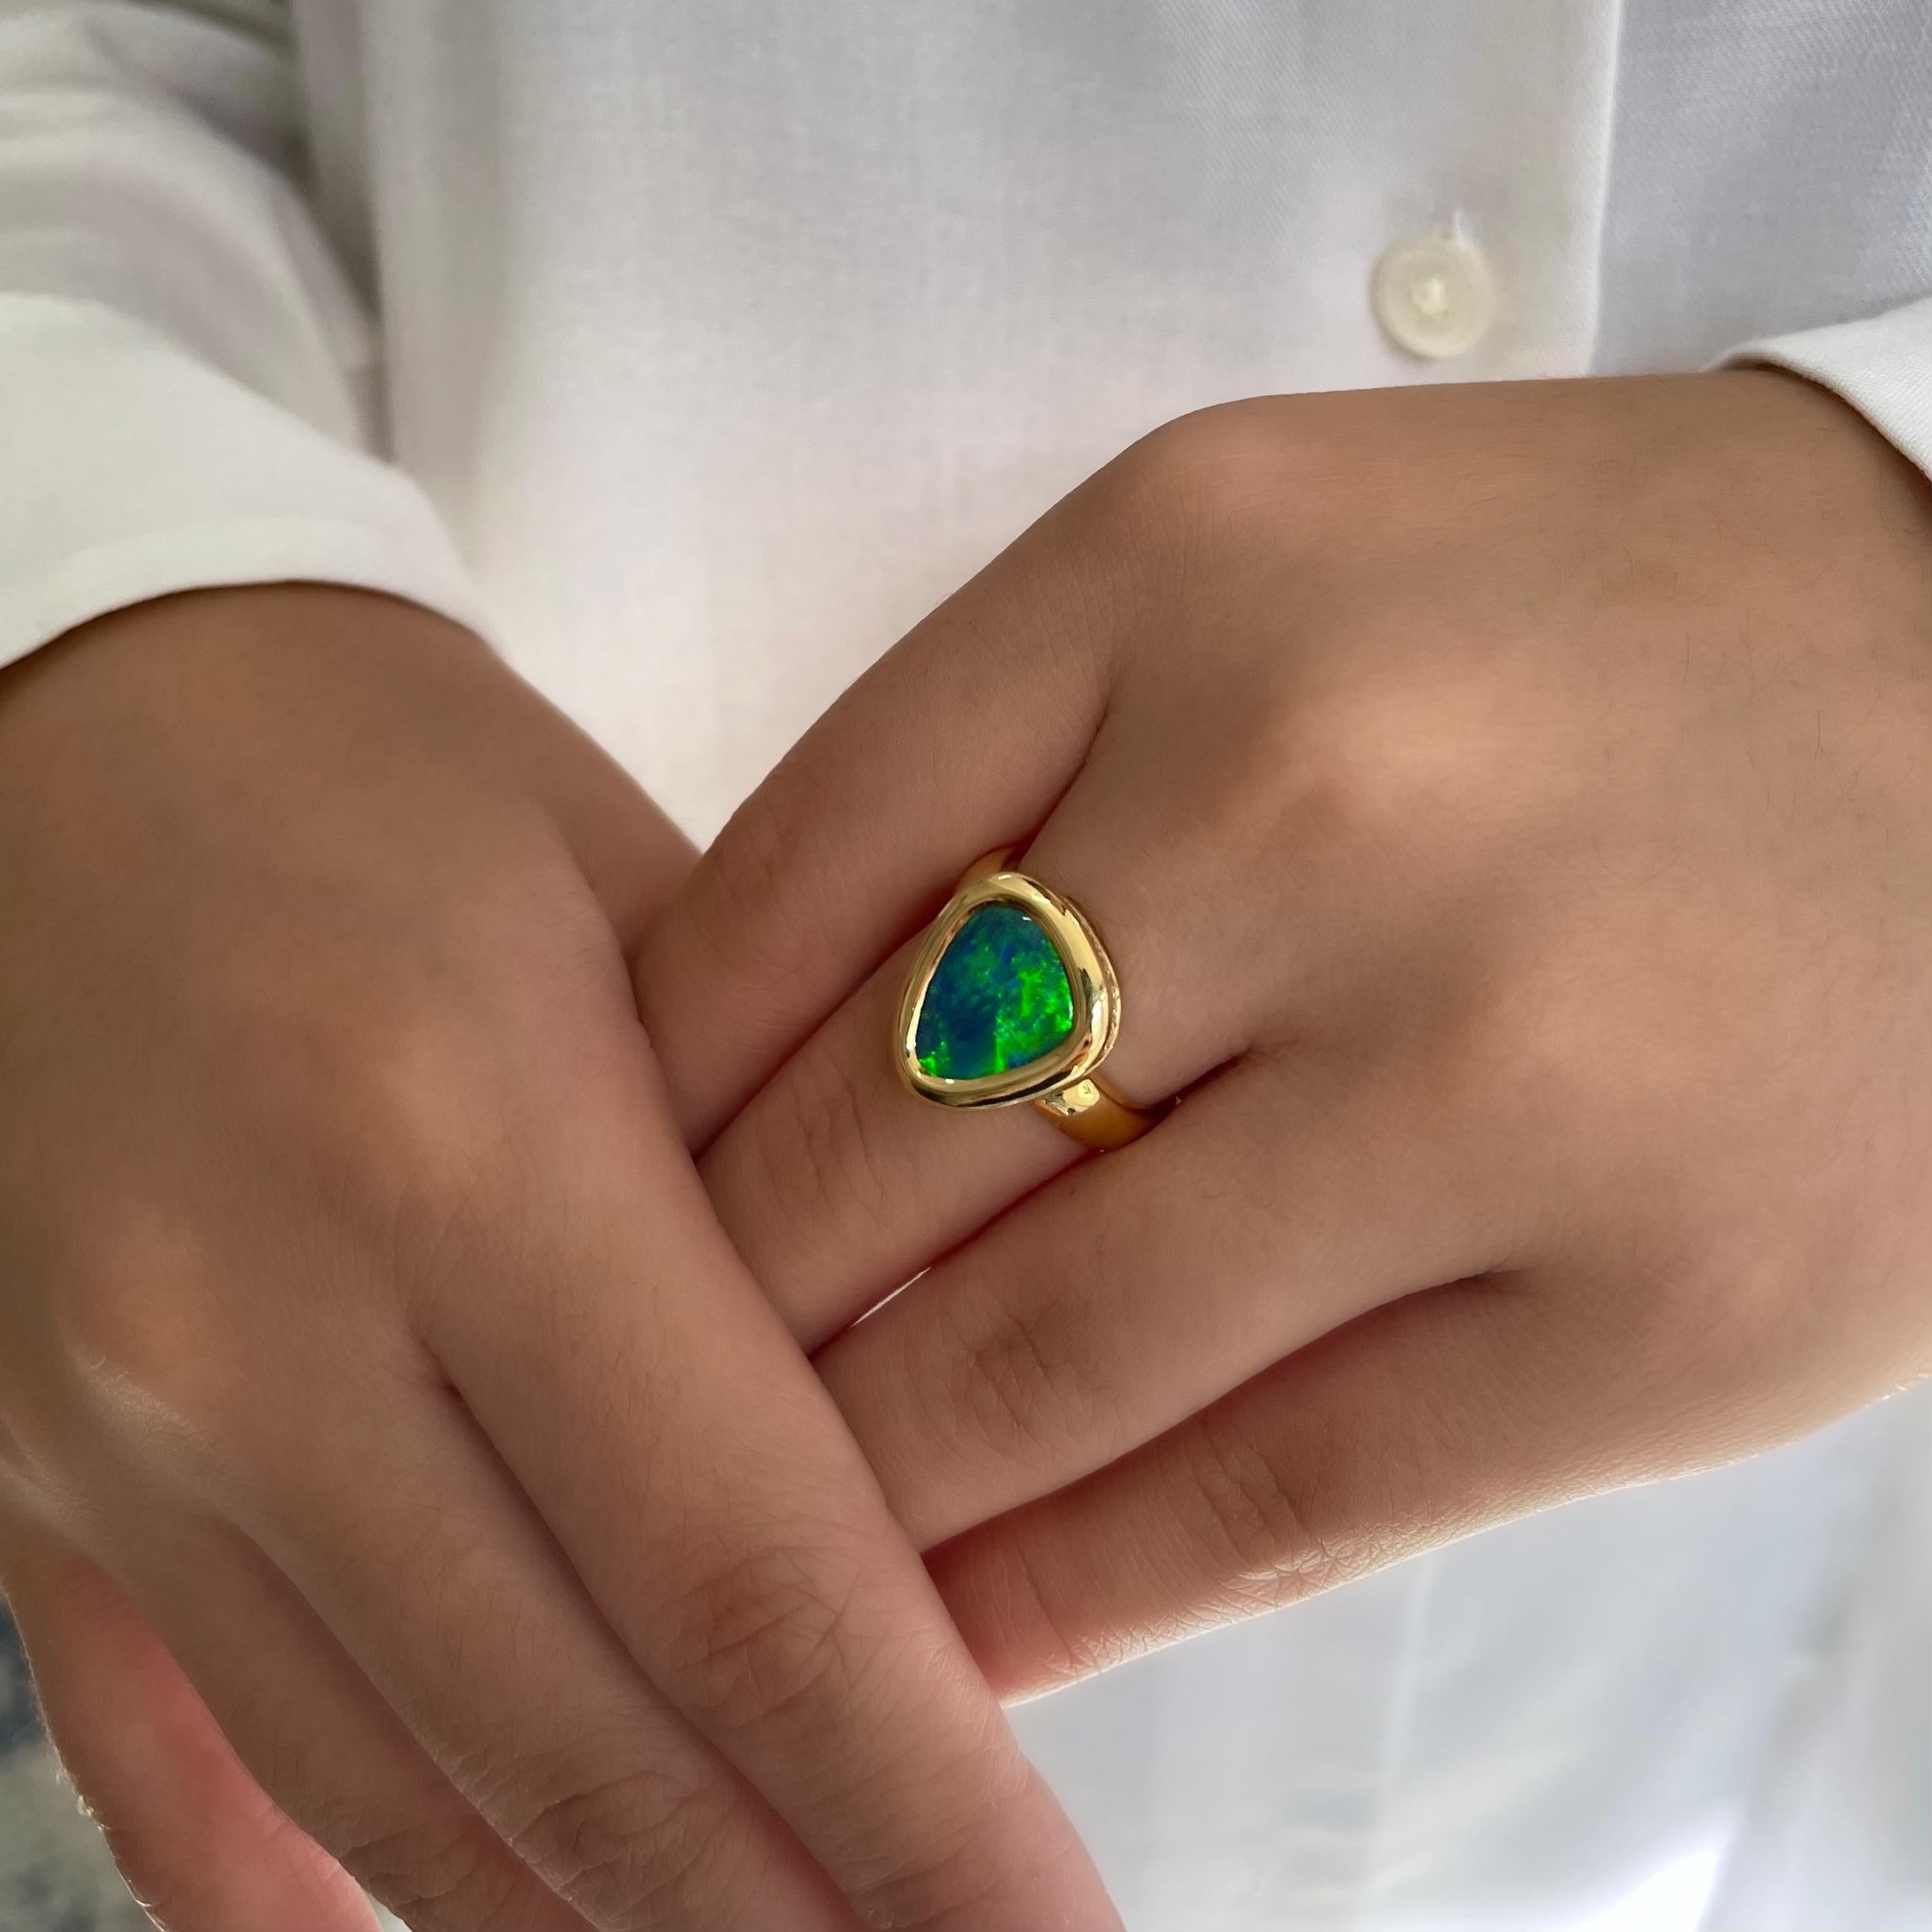 The graceful and exquisite ‘Love at First Kiss’ ring features an immaculate black opal (2.57ct) hailing from famous Lightning Ridge mines in NSW, Australia. The harmony of the green and blue play-of-colour in this ring is a remarkable feat of mother